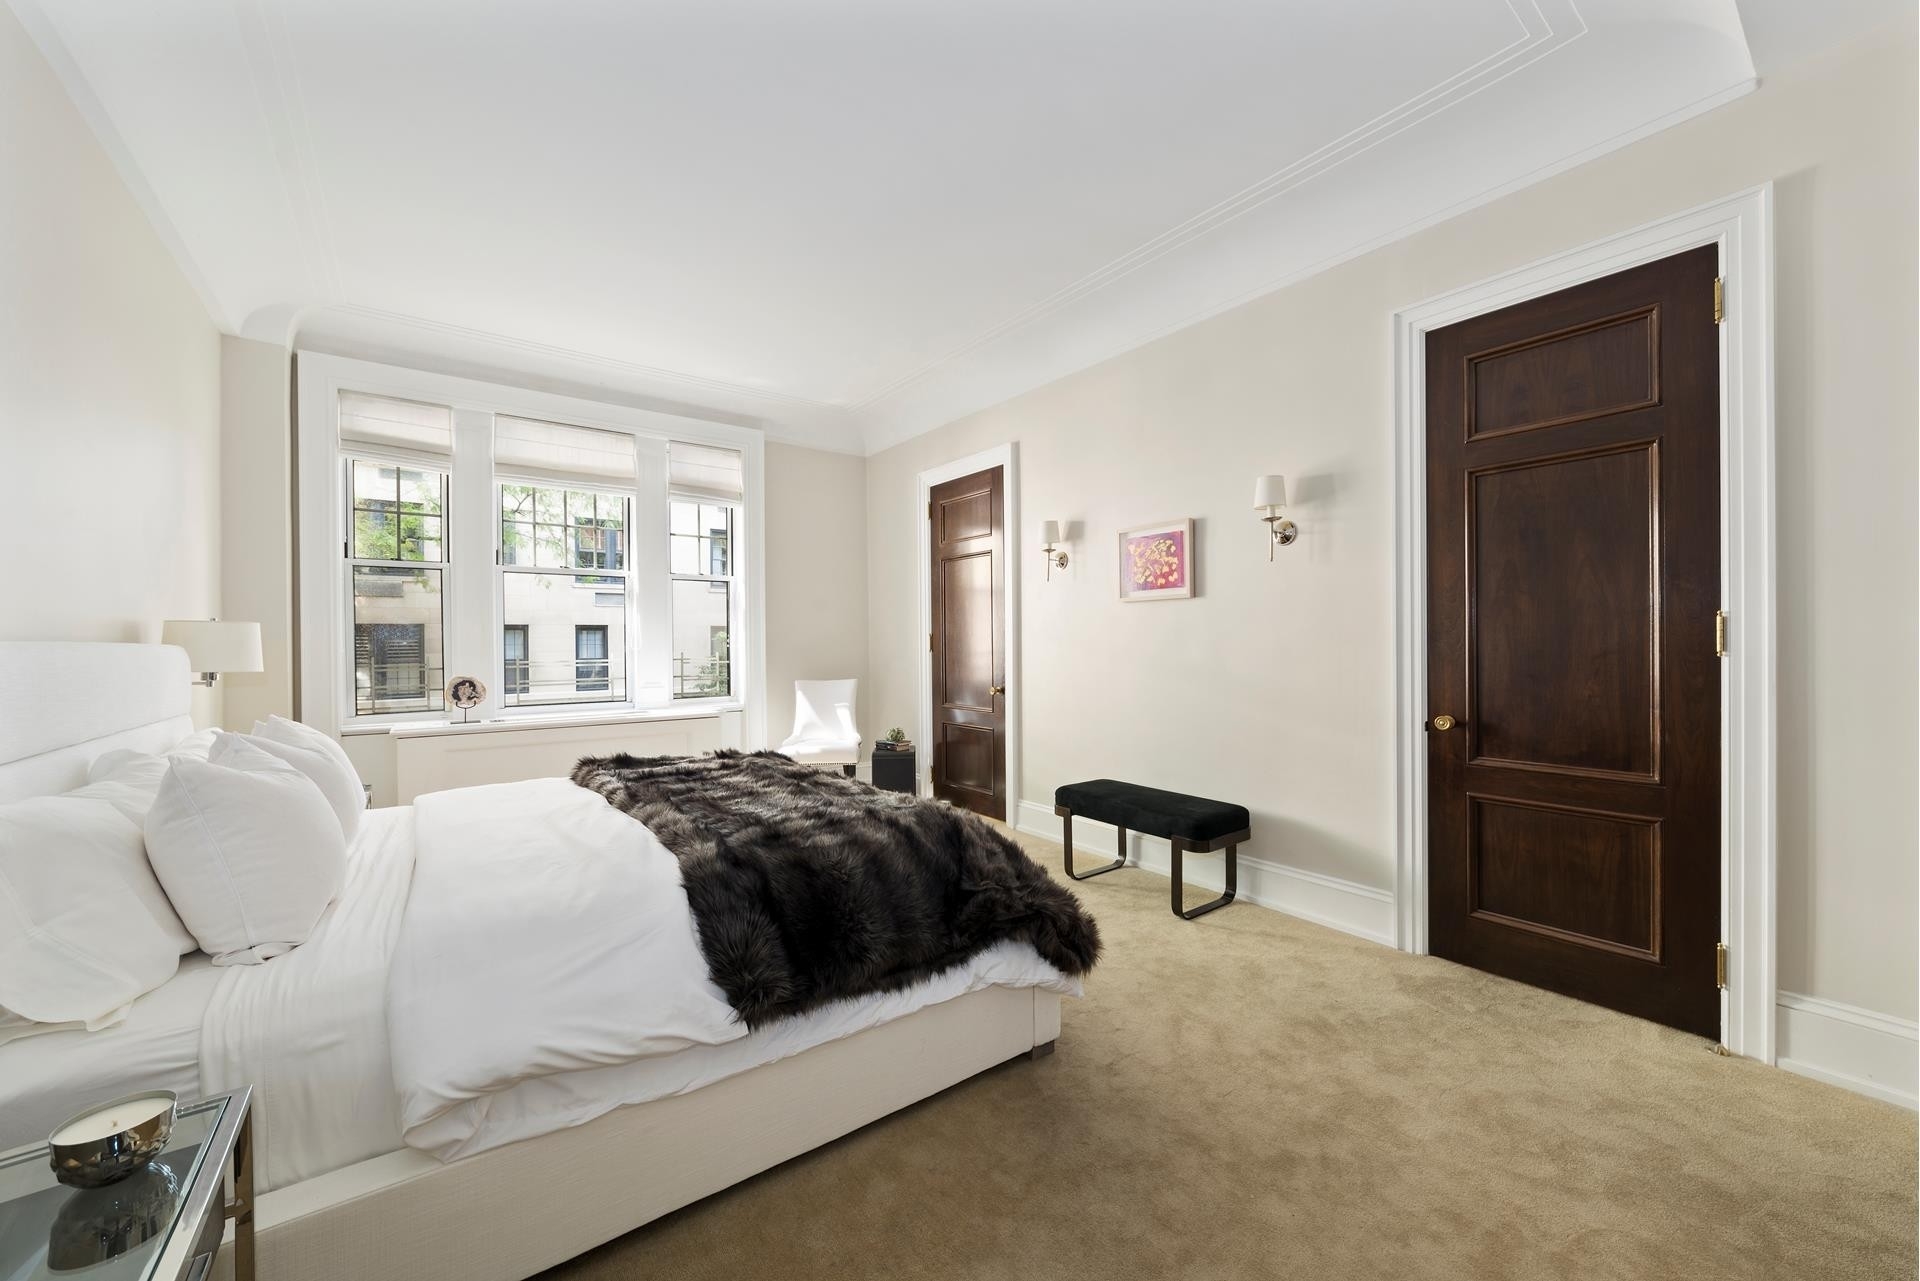 7. Co-op Properties for Sale at 875 PARK AVE, 2N Upper East Side, New York, NY 10075